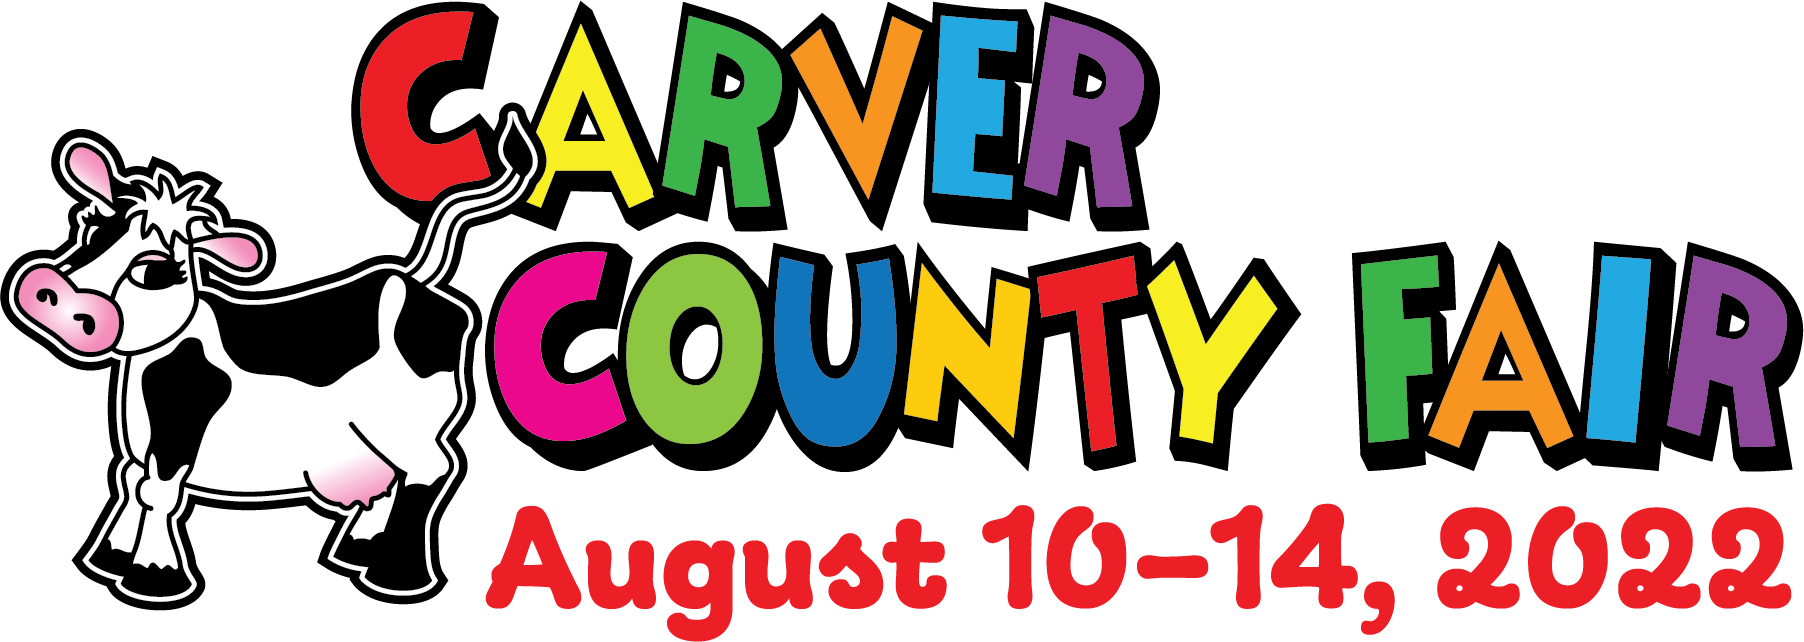 Tickets & More Carver County Fair Online Store